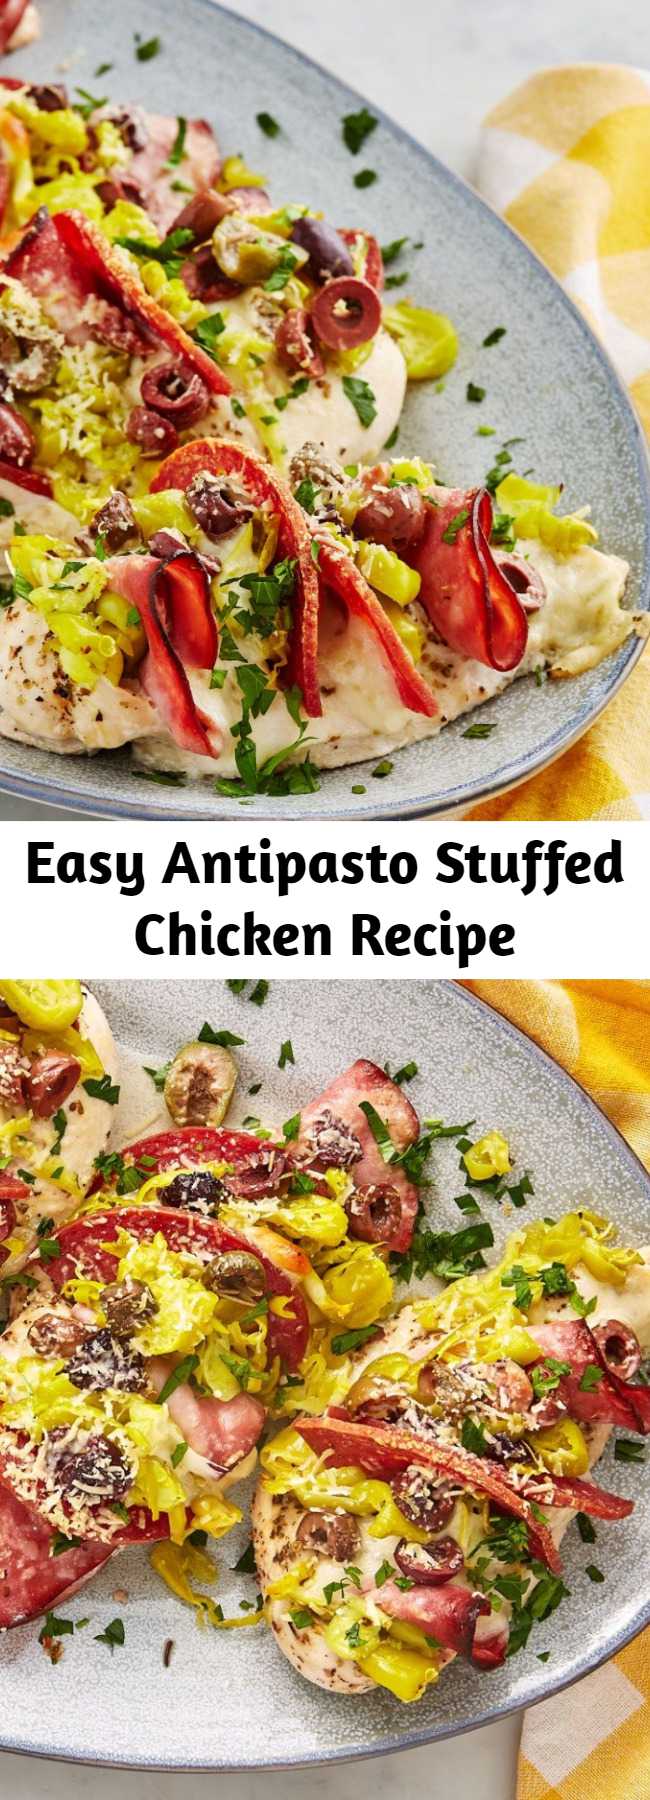 Easy Antipasto Stuffed Chicken Recipe - Antipasto Stuffed Chicken is a flavor party and is super low-carb friendly.